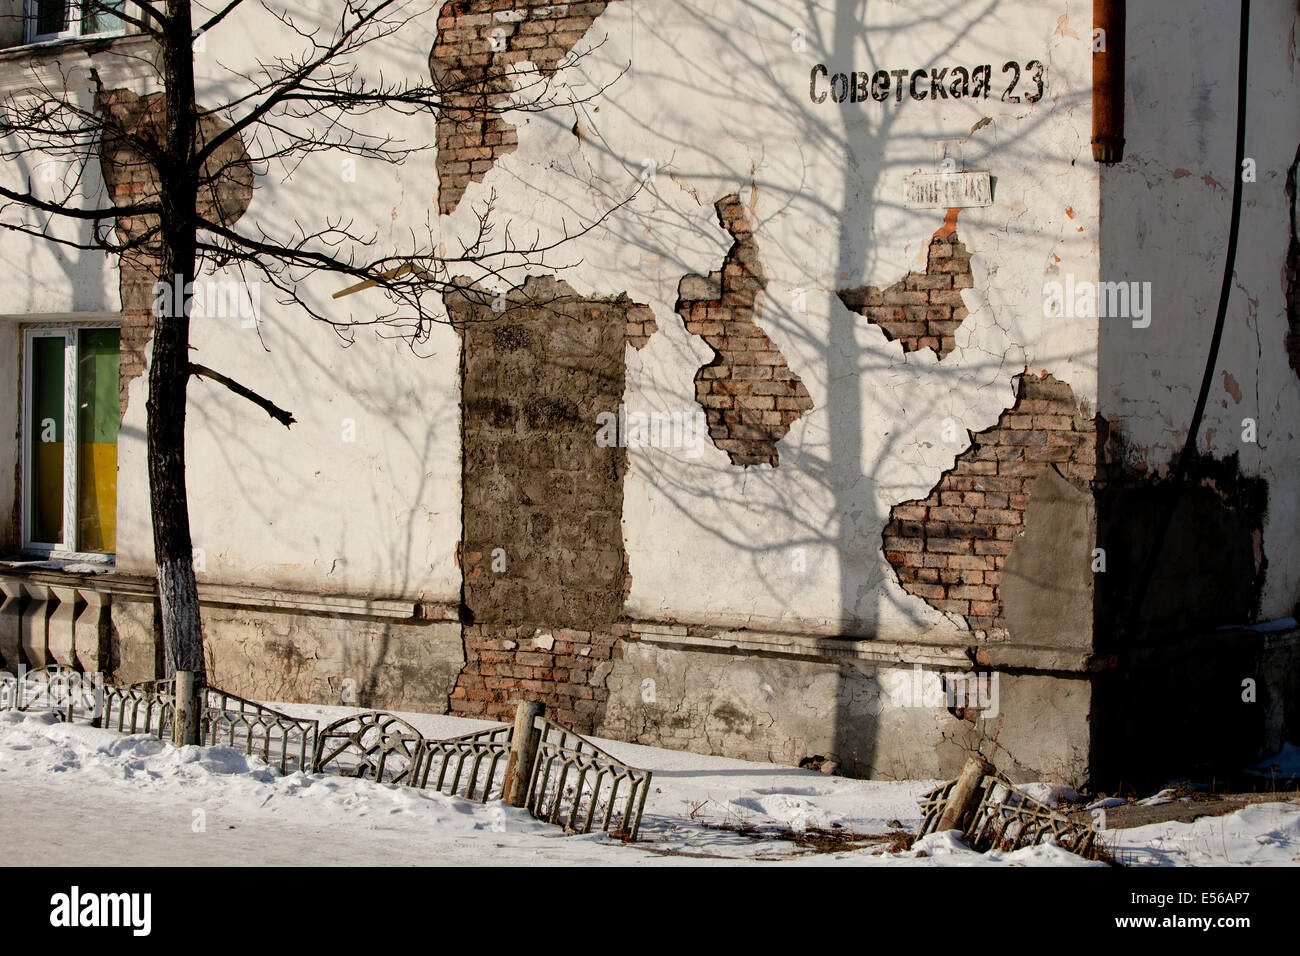 Street wall exposed brick Russian weathered snow Stock Photo